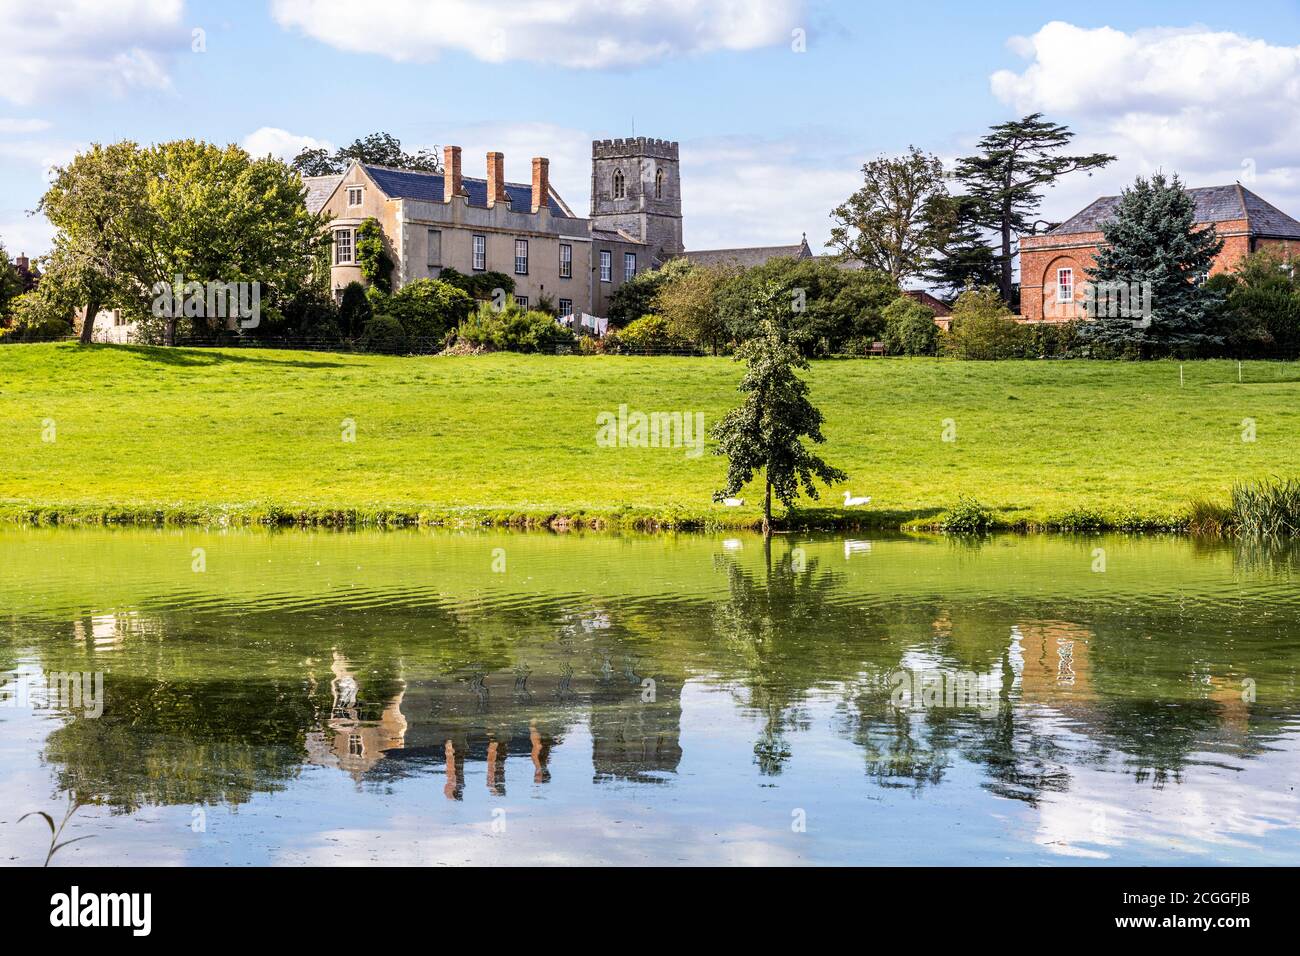 Maisemore Court and St Giles church viewed across the lake in the Severn Vale village of Maisemore, Gloucestershire UK Stock Photo